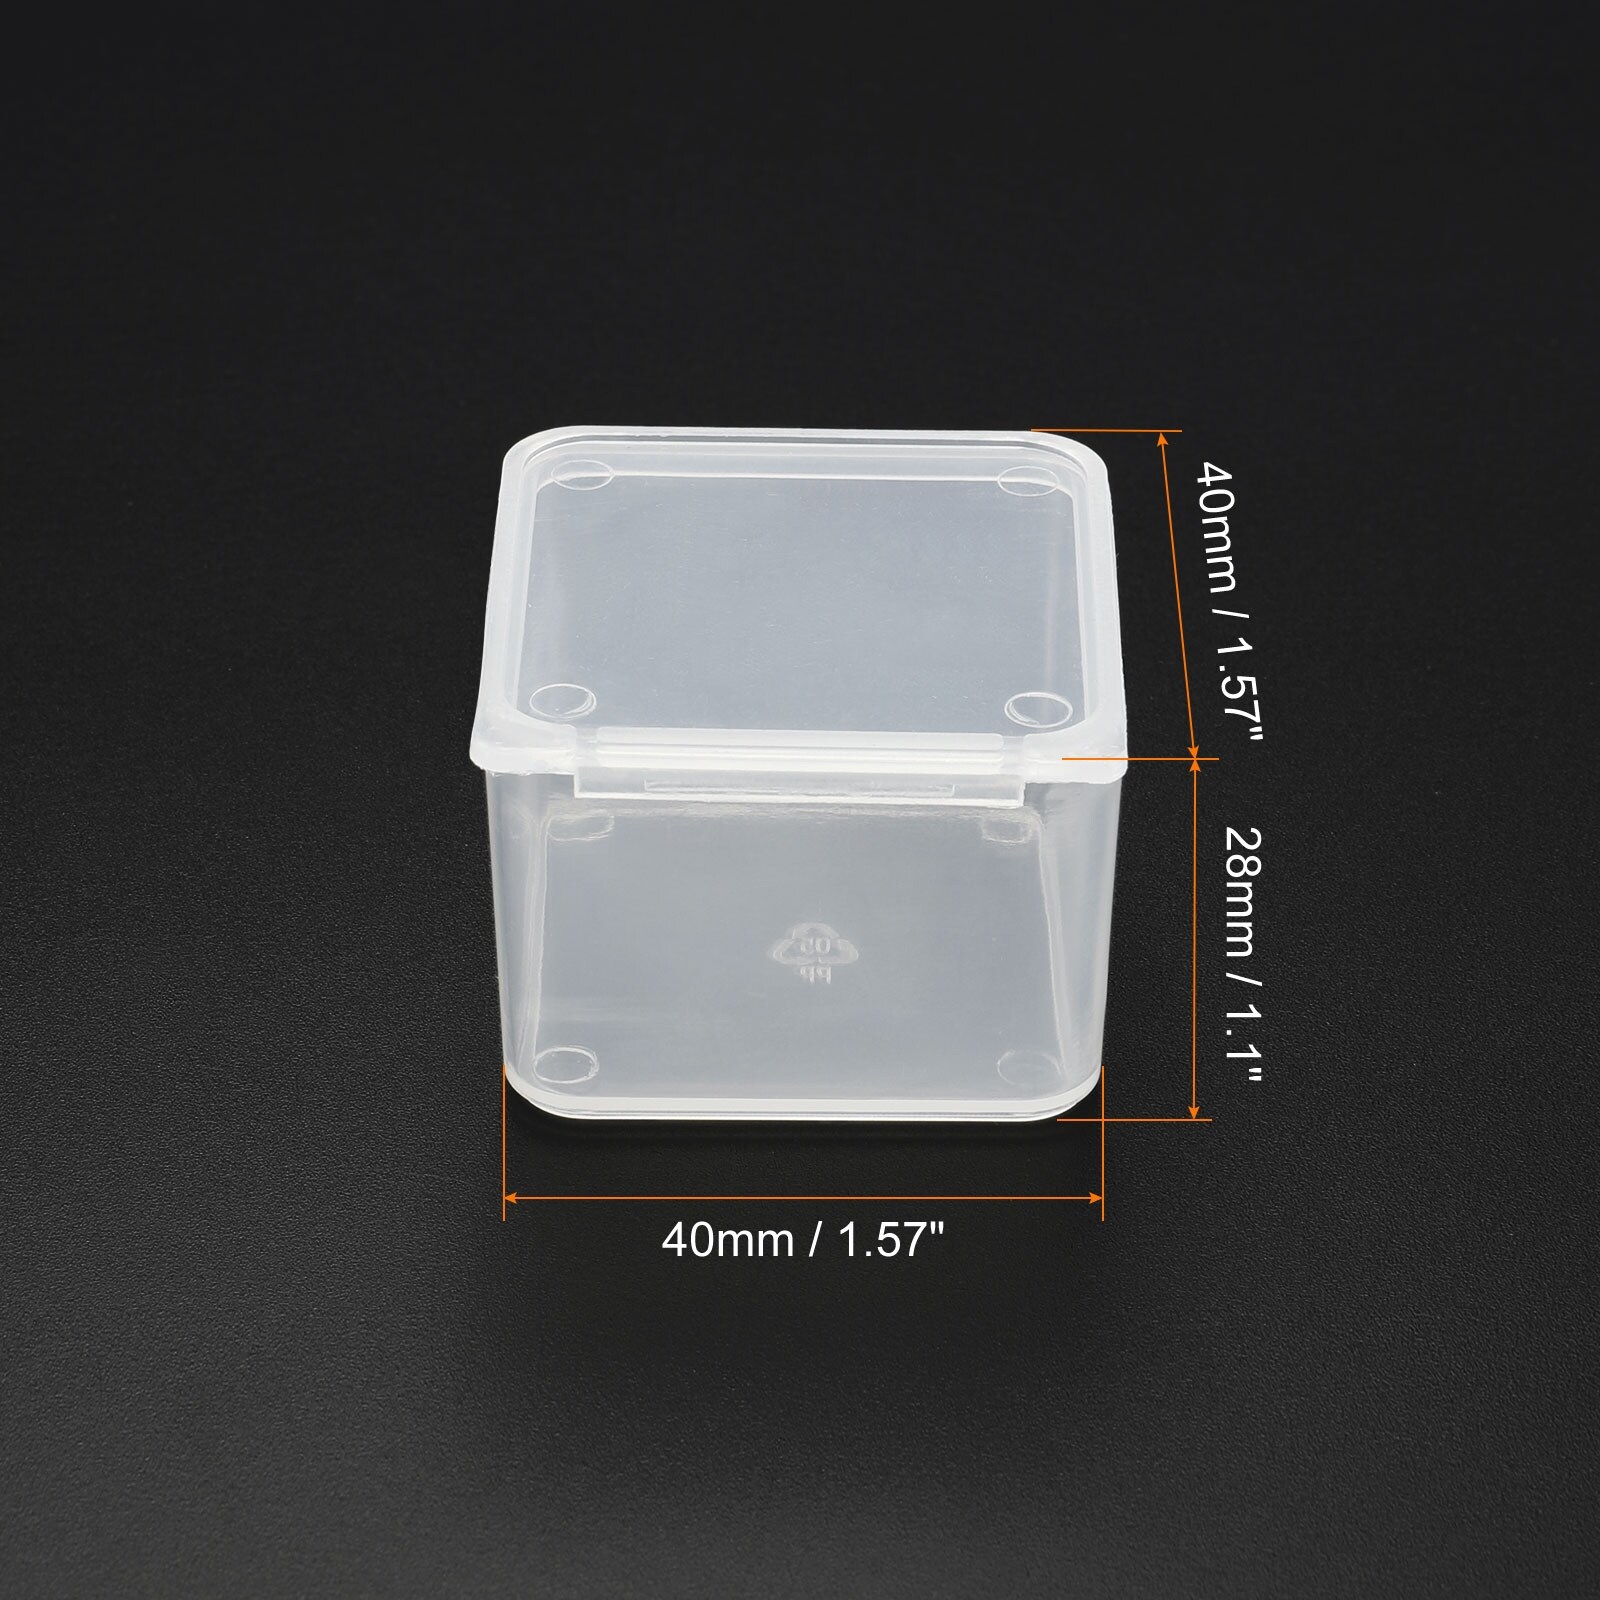 https://ak1.ostkcdn.com/images/products/is/images/direct/e630fae3d01b0d6db06022c2567907129363df46/12pcs-Clear-Storage-Container-with-Hinged-Lid-40x28mm-Plastic-Square-Craft-Box.jpg